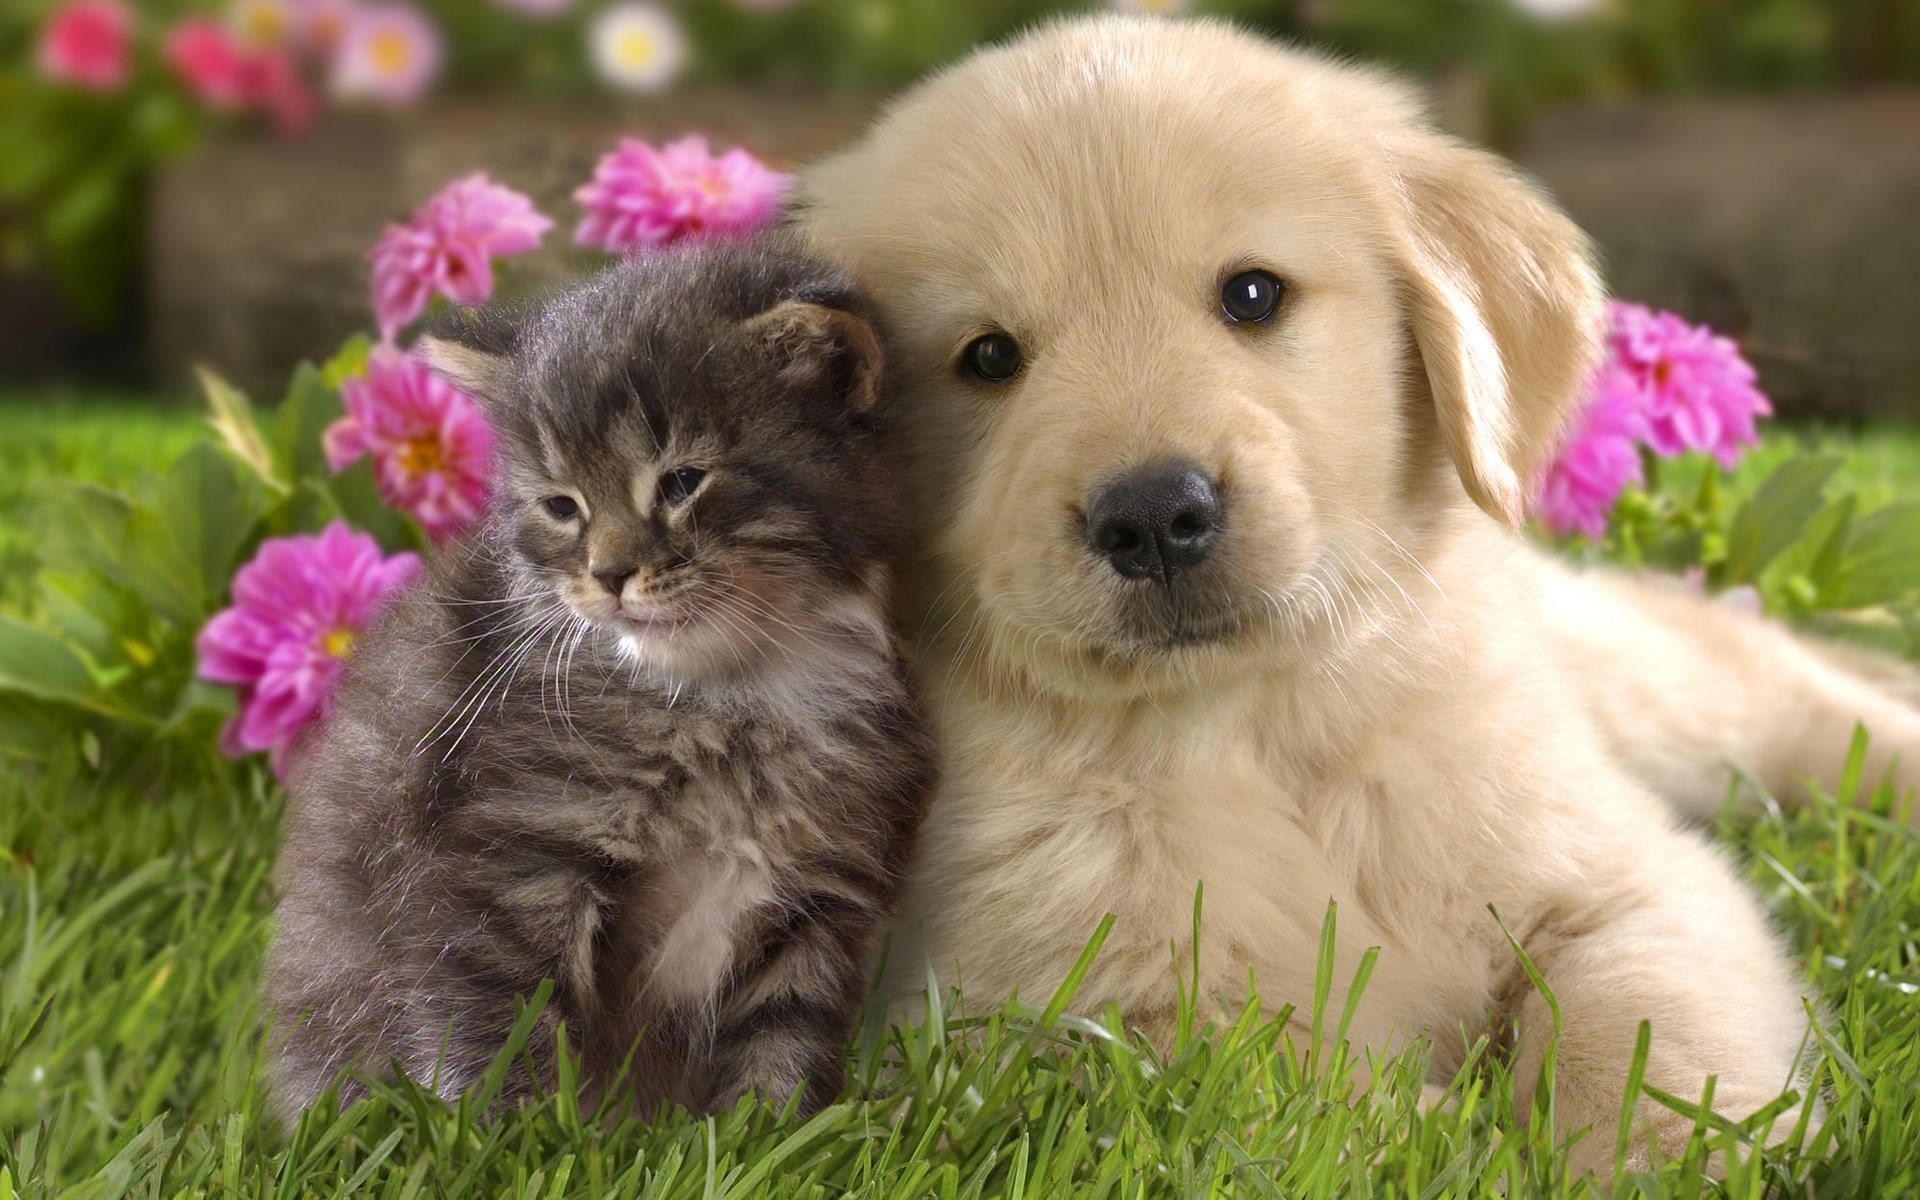 Download Cute Kitten and Puppy Wallpaper Free Wallpapers